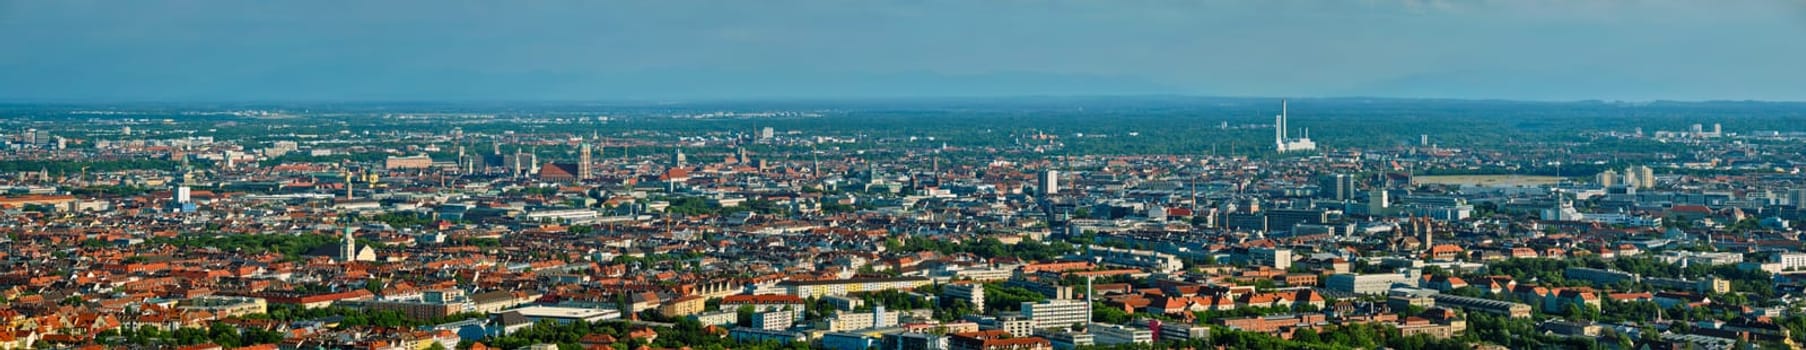 Aerial panorama of Munich center from Olympiaturm (Olympic Tower). Munich, Bavaria, Germany